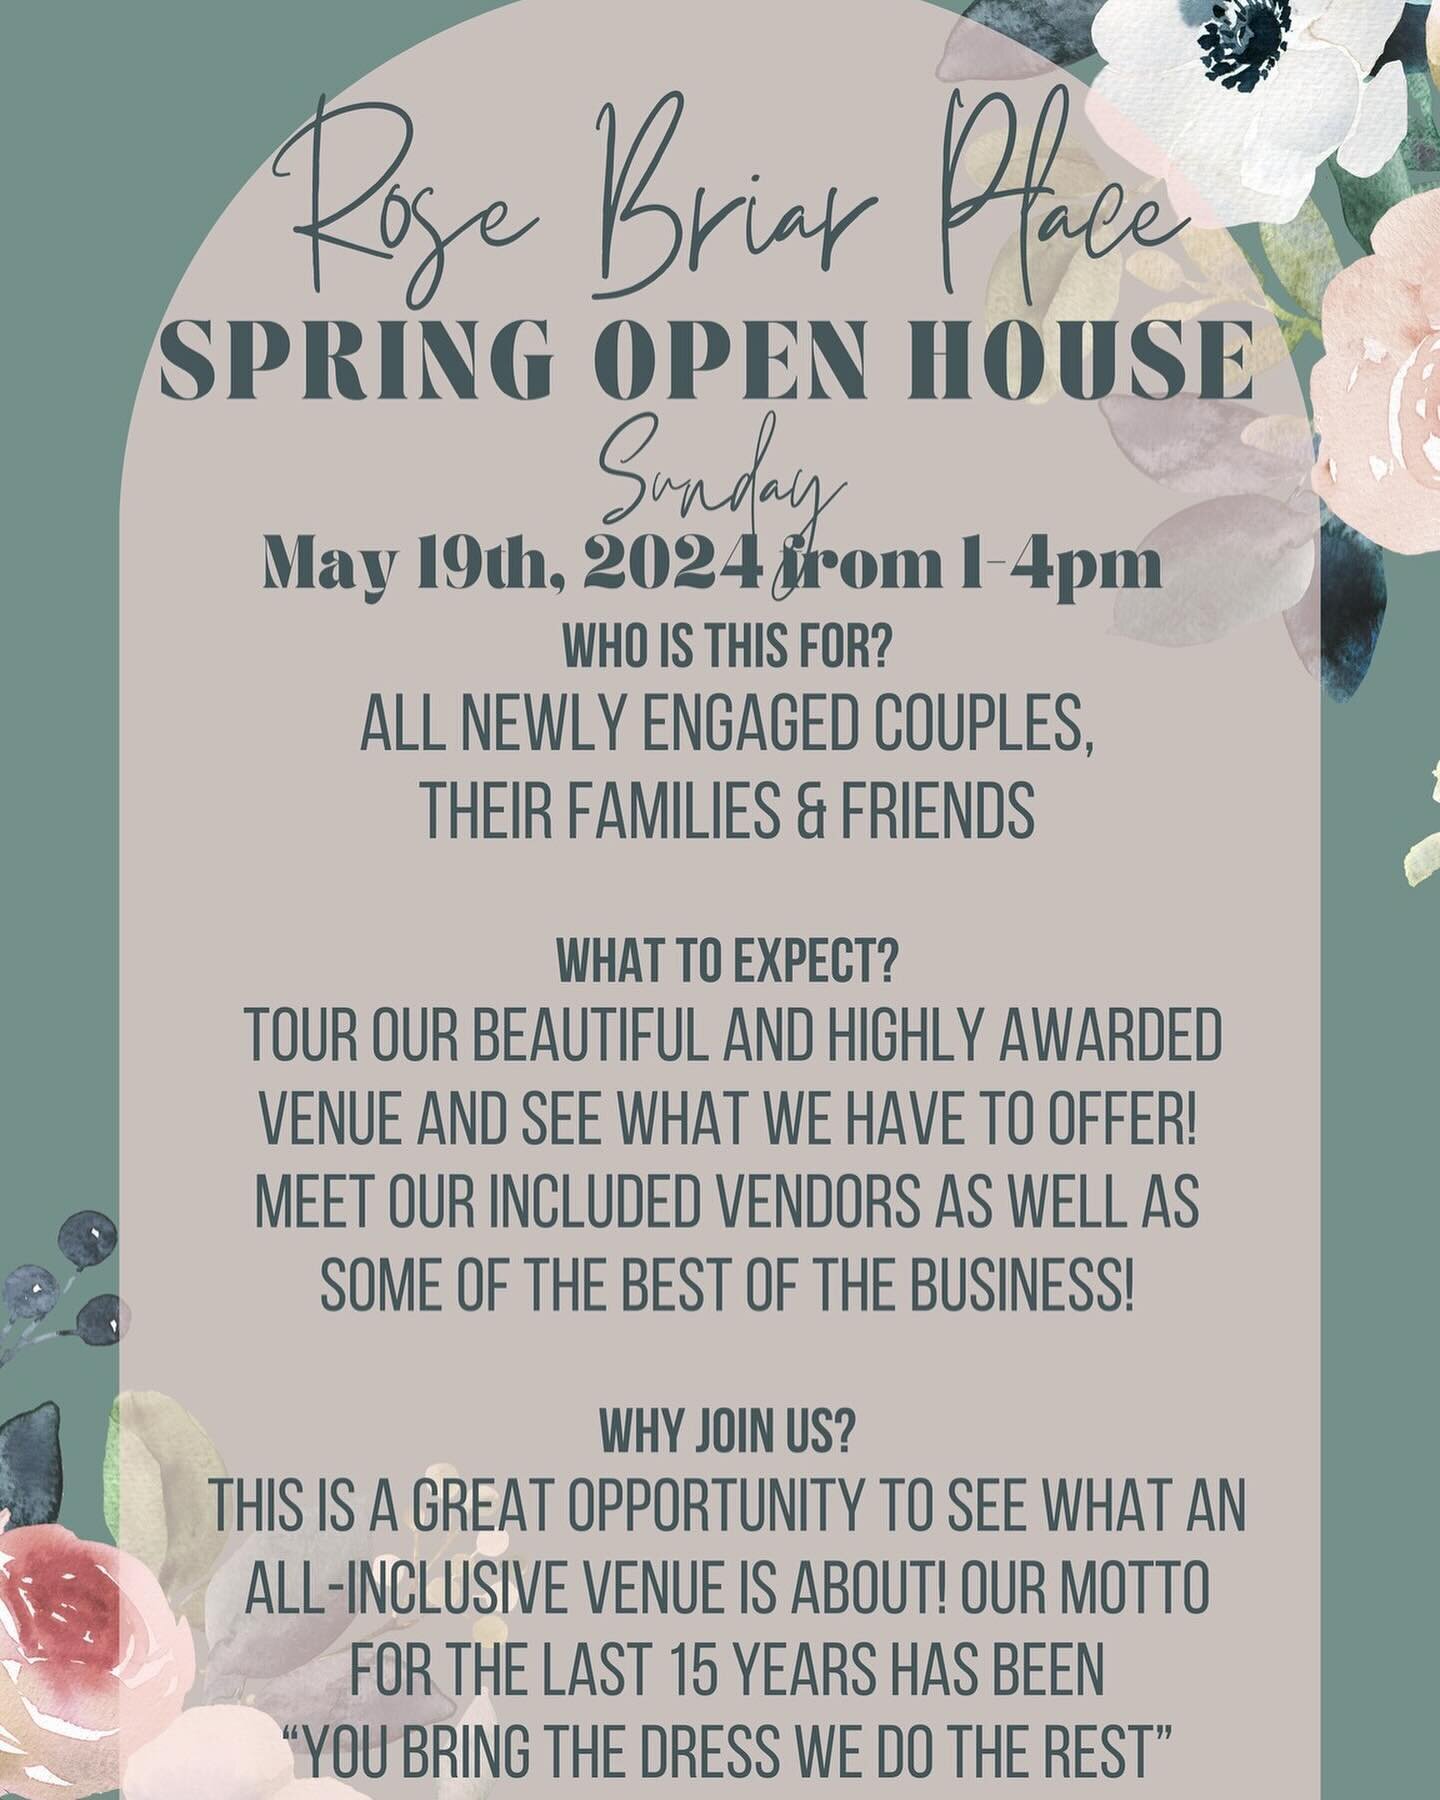 We are super excited to host a Spring Open House!! This is a great and fantastic experience for Newly Engaged couples to tour our Venue, talk with Planners and meet Vendors!! We will have our included vendors here to meet you, so you get a taste of w